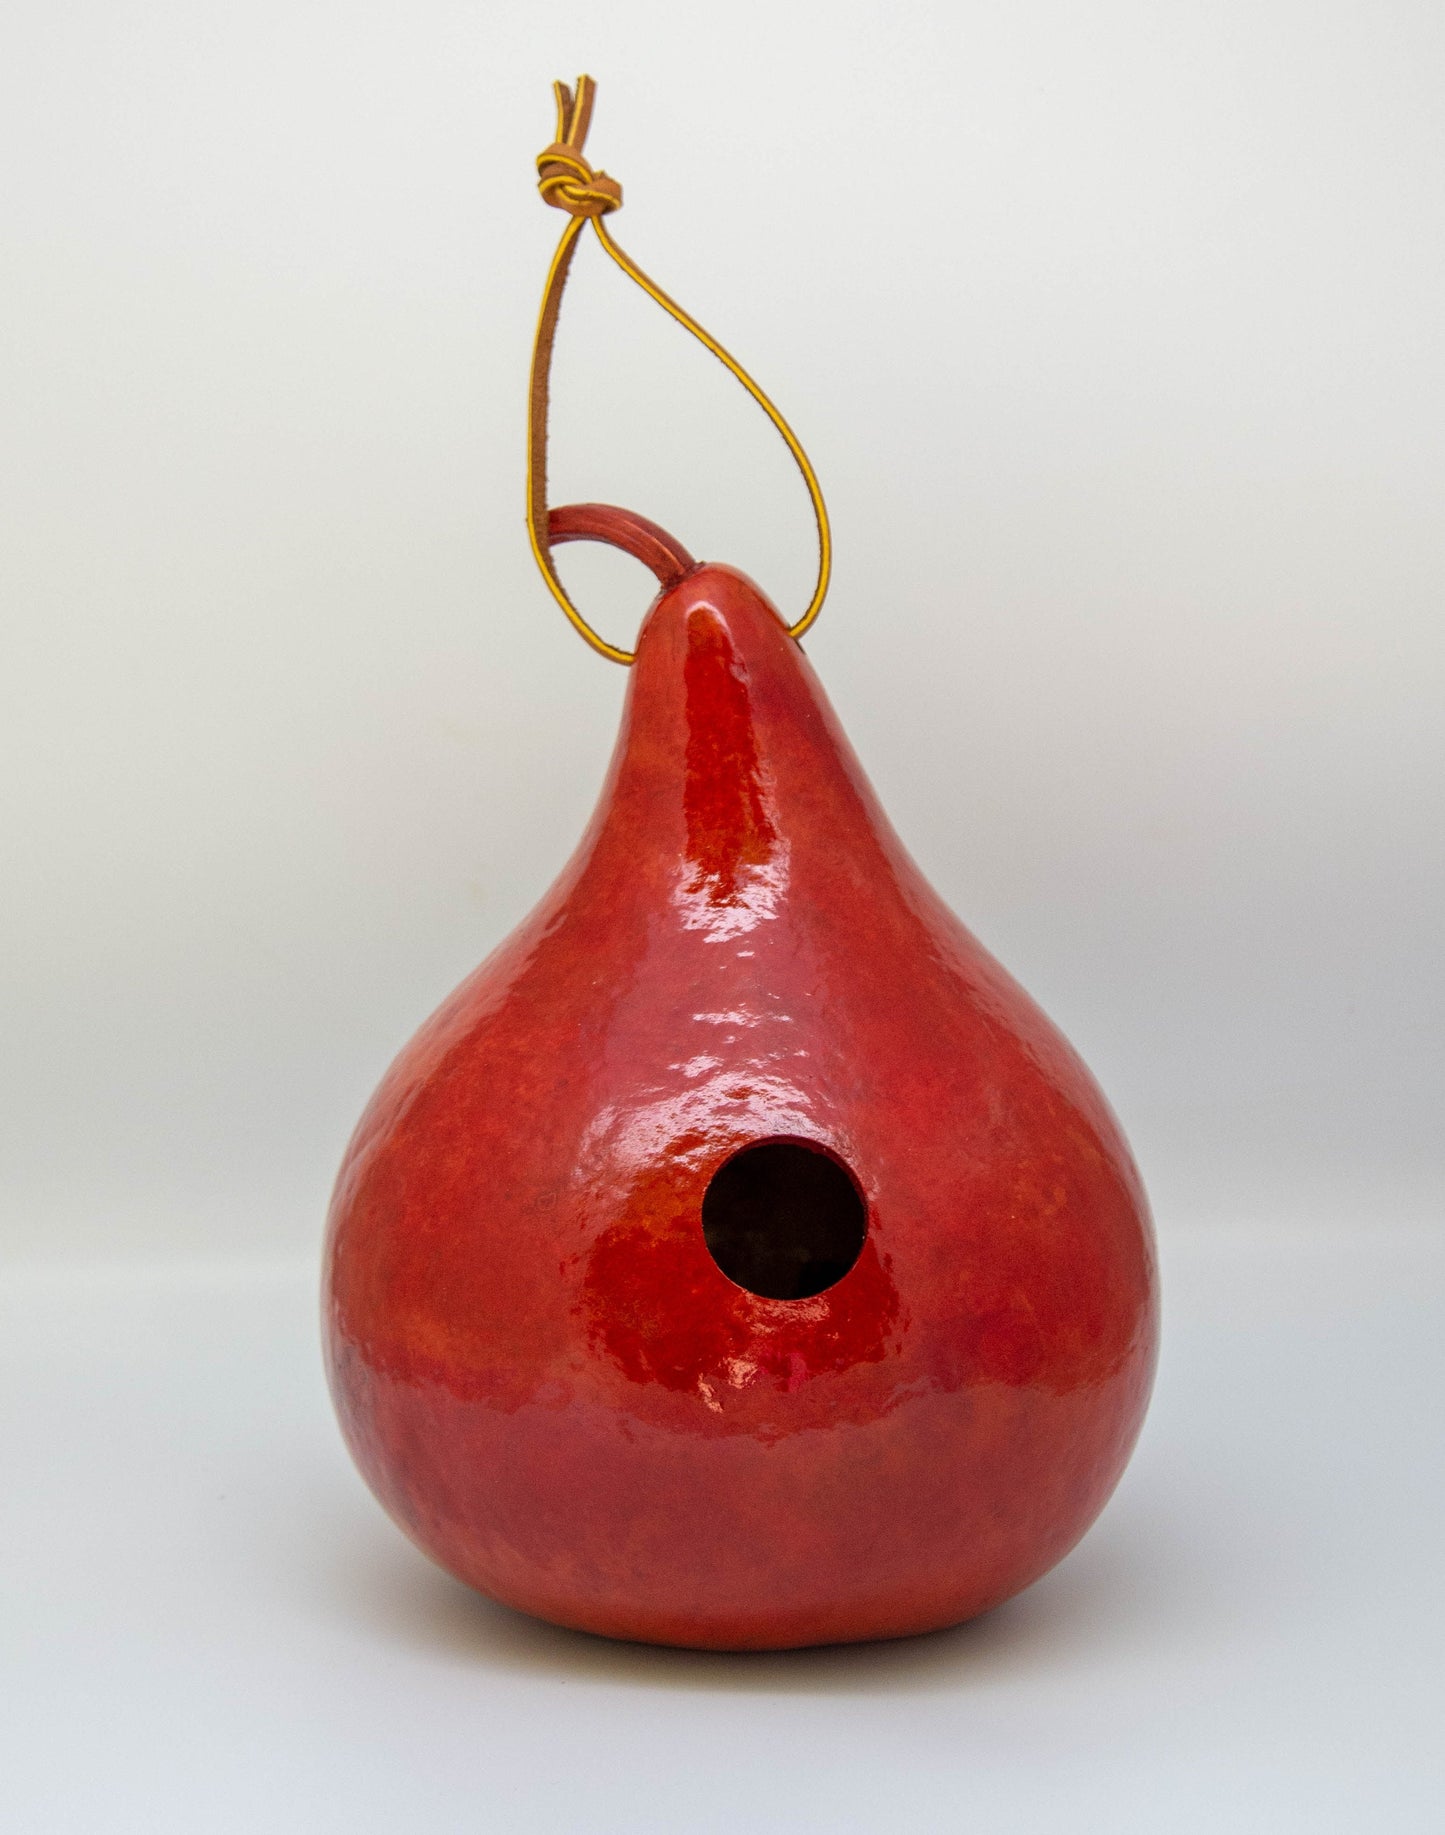 Gourd Birdhouses Handmade Set of 3 Red, Yellow and Green